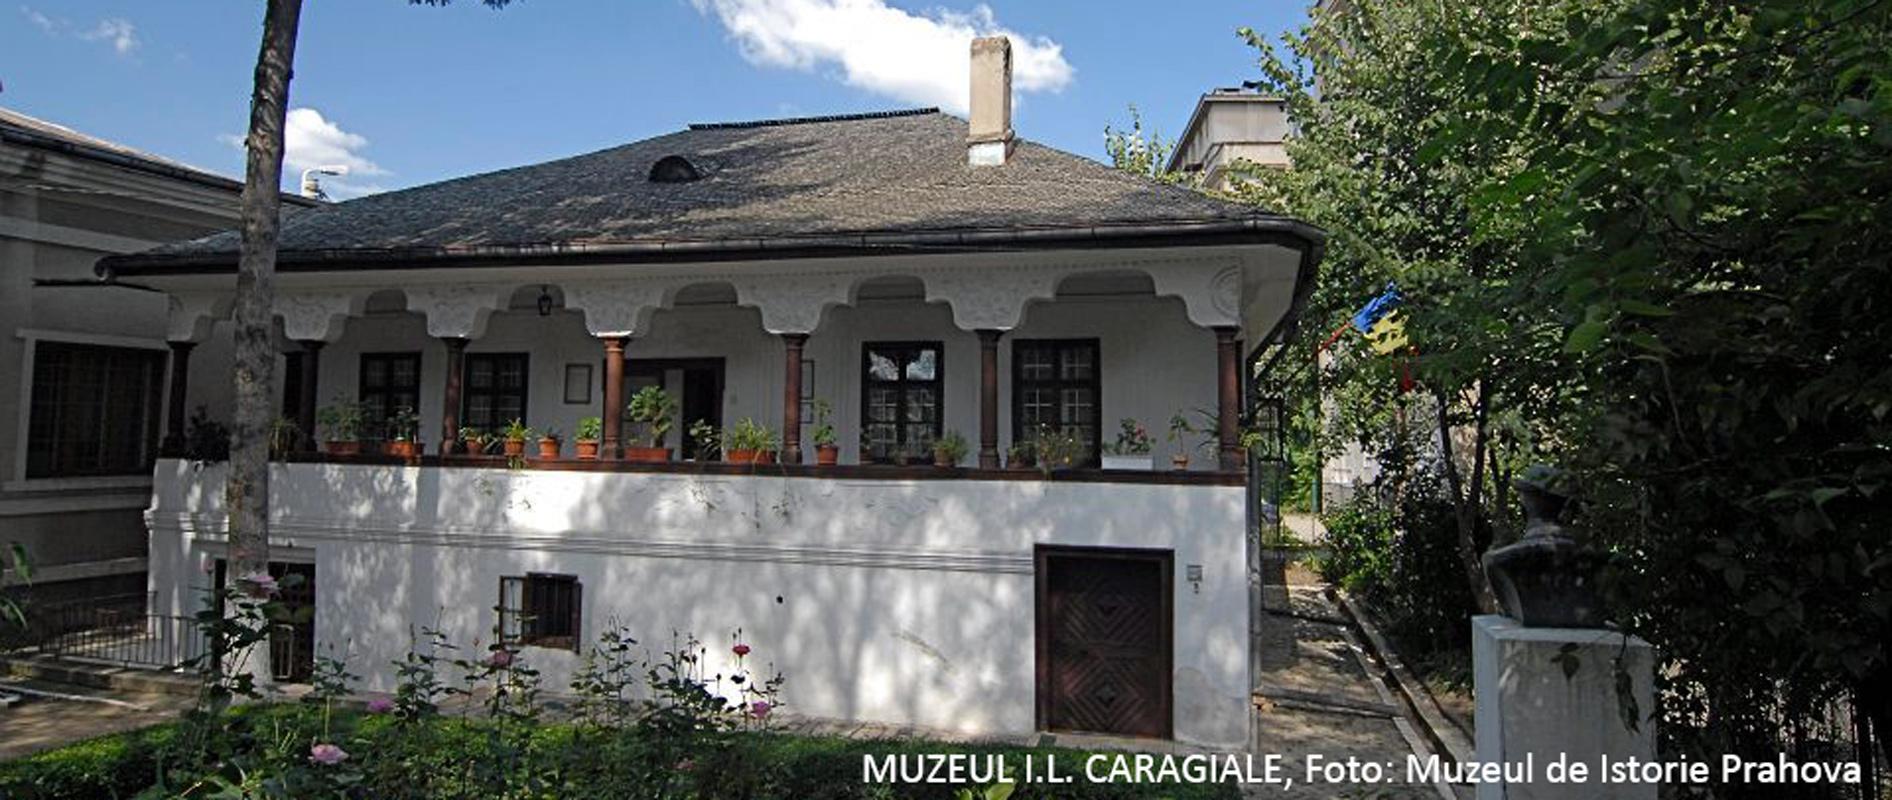 Cover image of this place Muzeul Memorial "I.L. Caragiale"